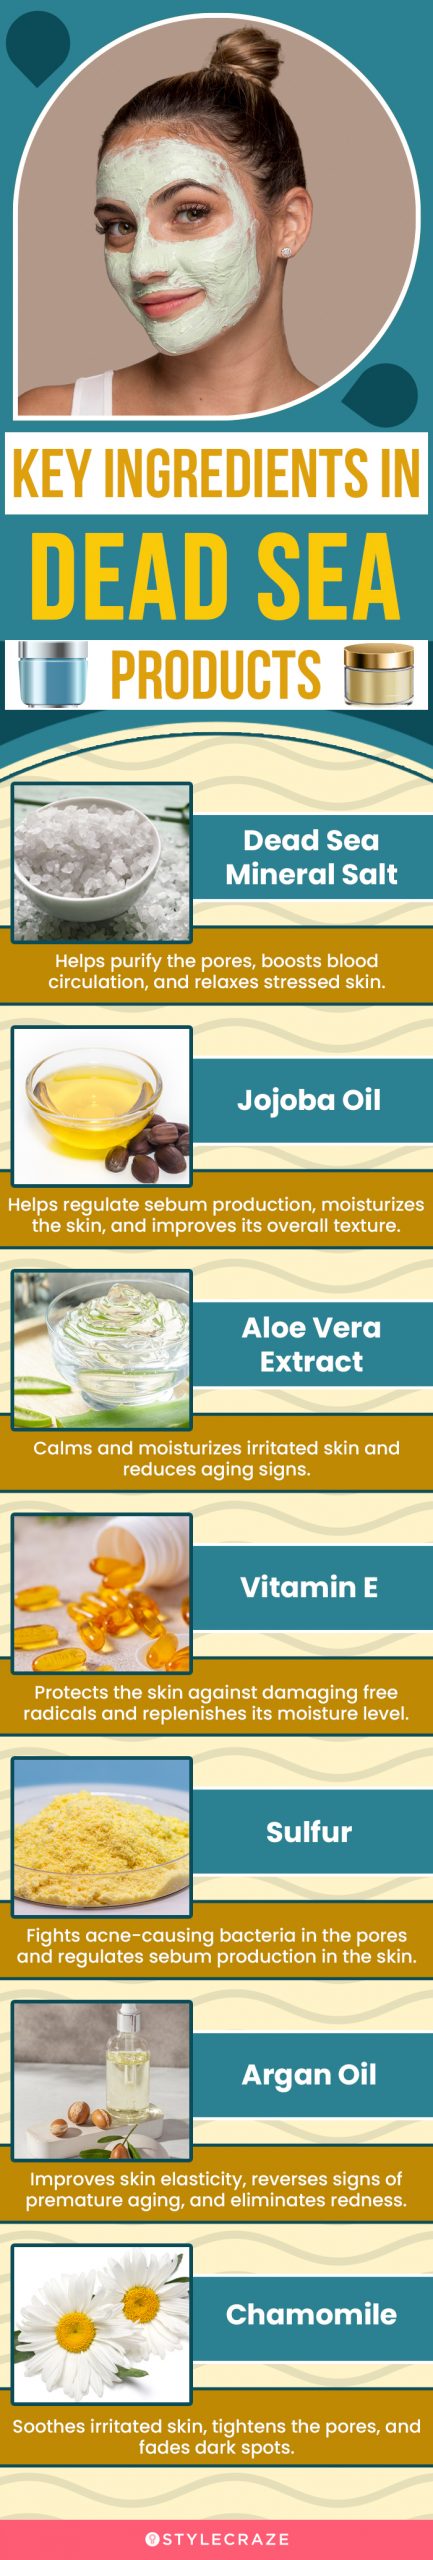 Key Ingredients In Dead Sea Products (infographic)